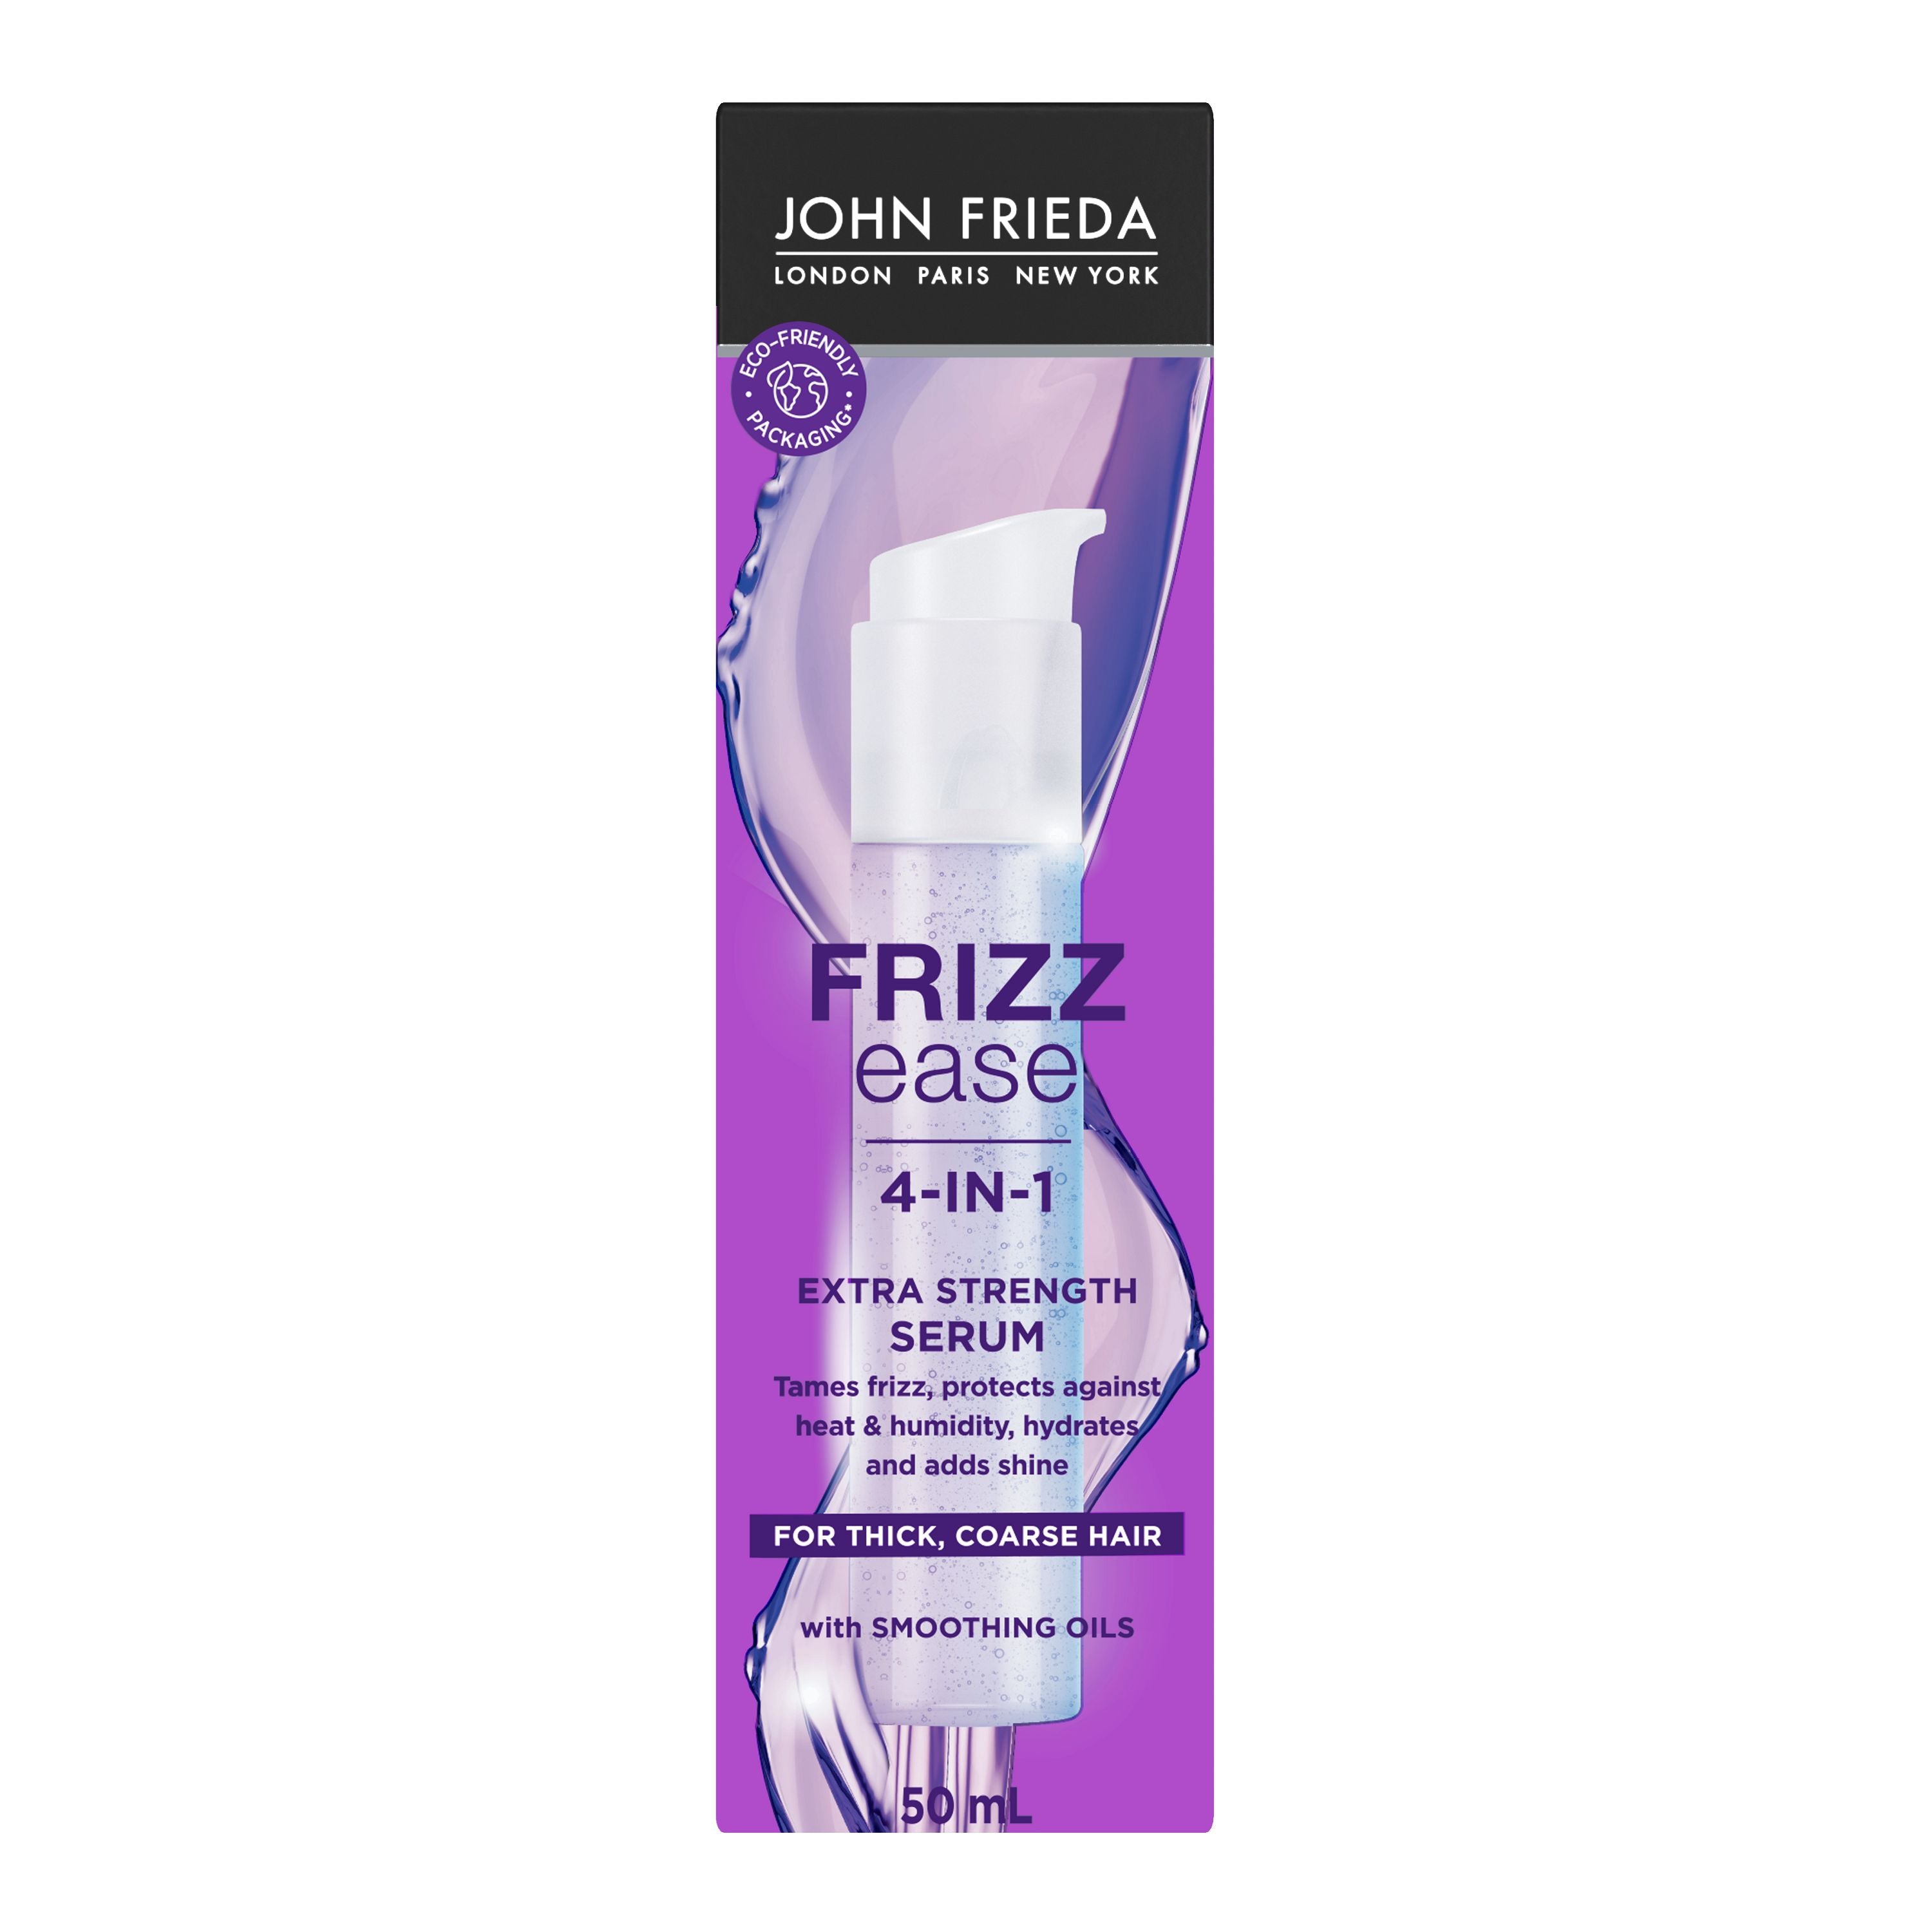 English: Frizz Ease® Extra Strength Serum packaging image. It comes in a thin rectangle box. Français: Image de l’emballage Sérum extra-fort Frizz EaseMD. Offert dans une boîte mince rectangulaire.